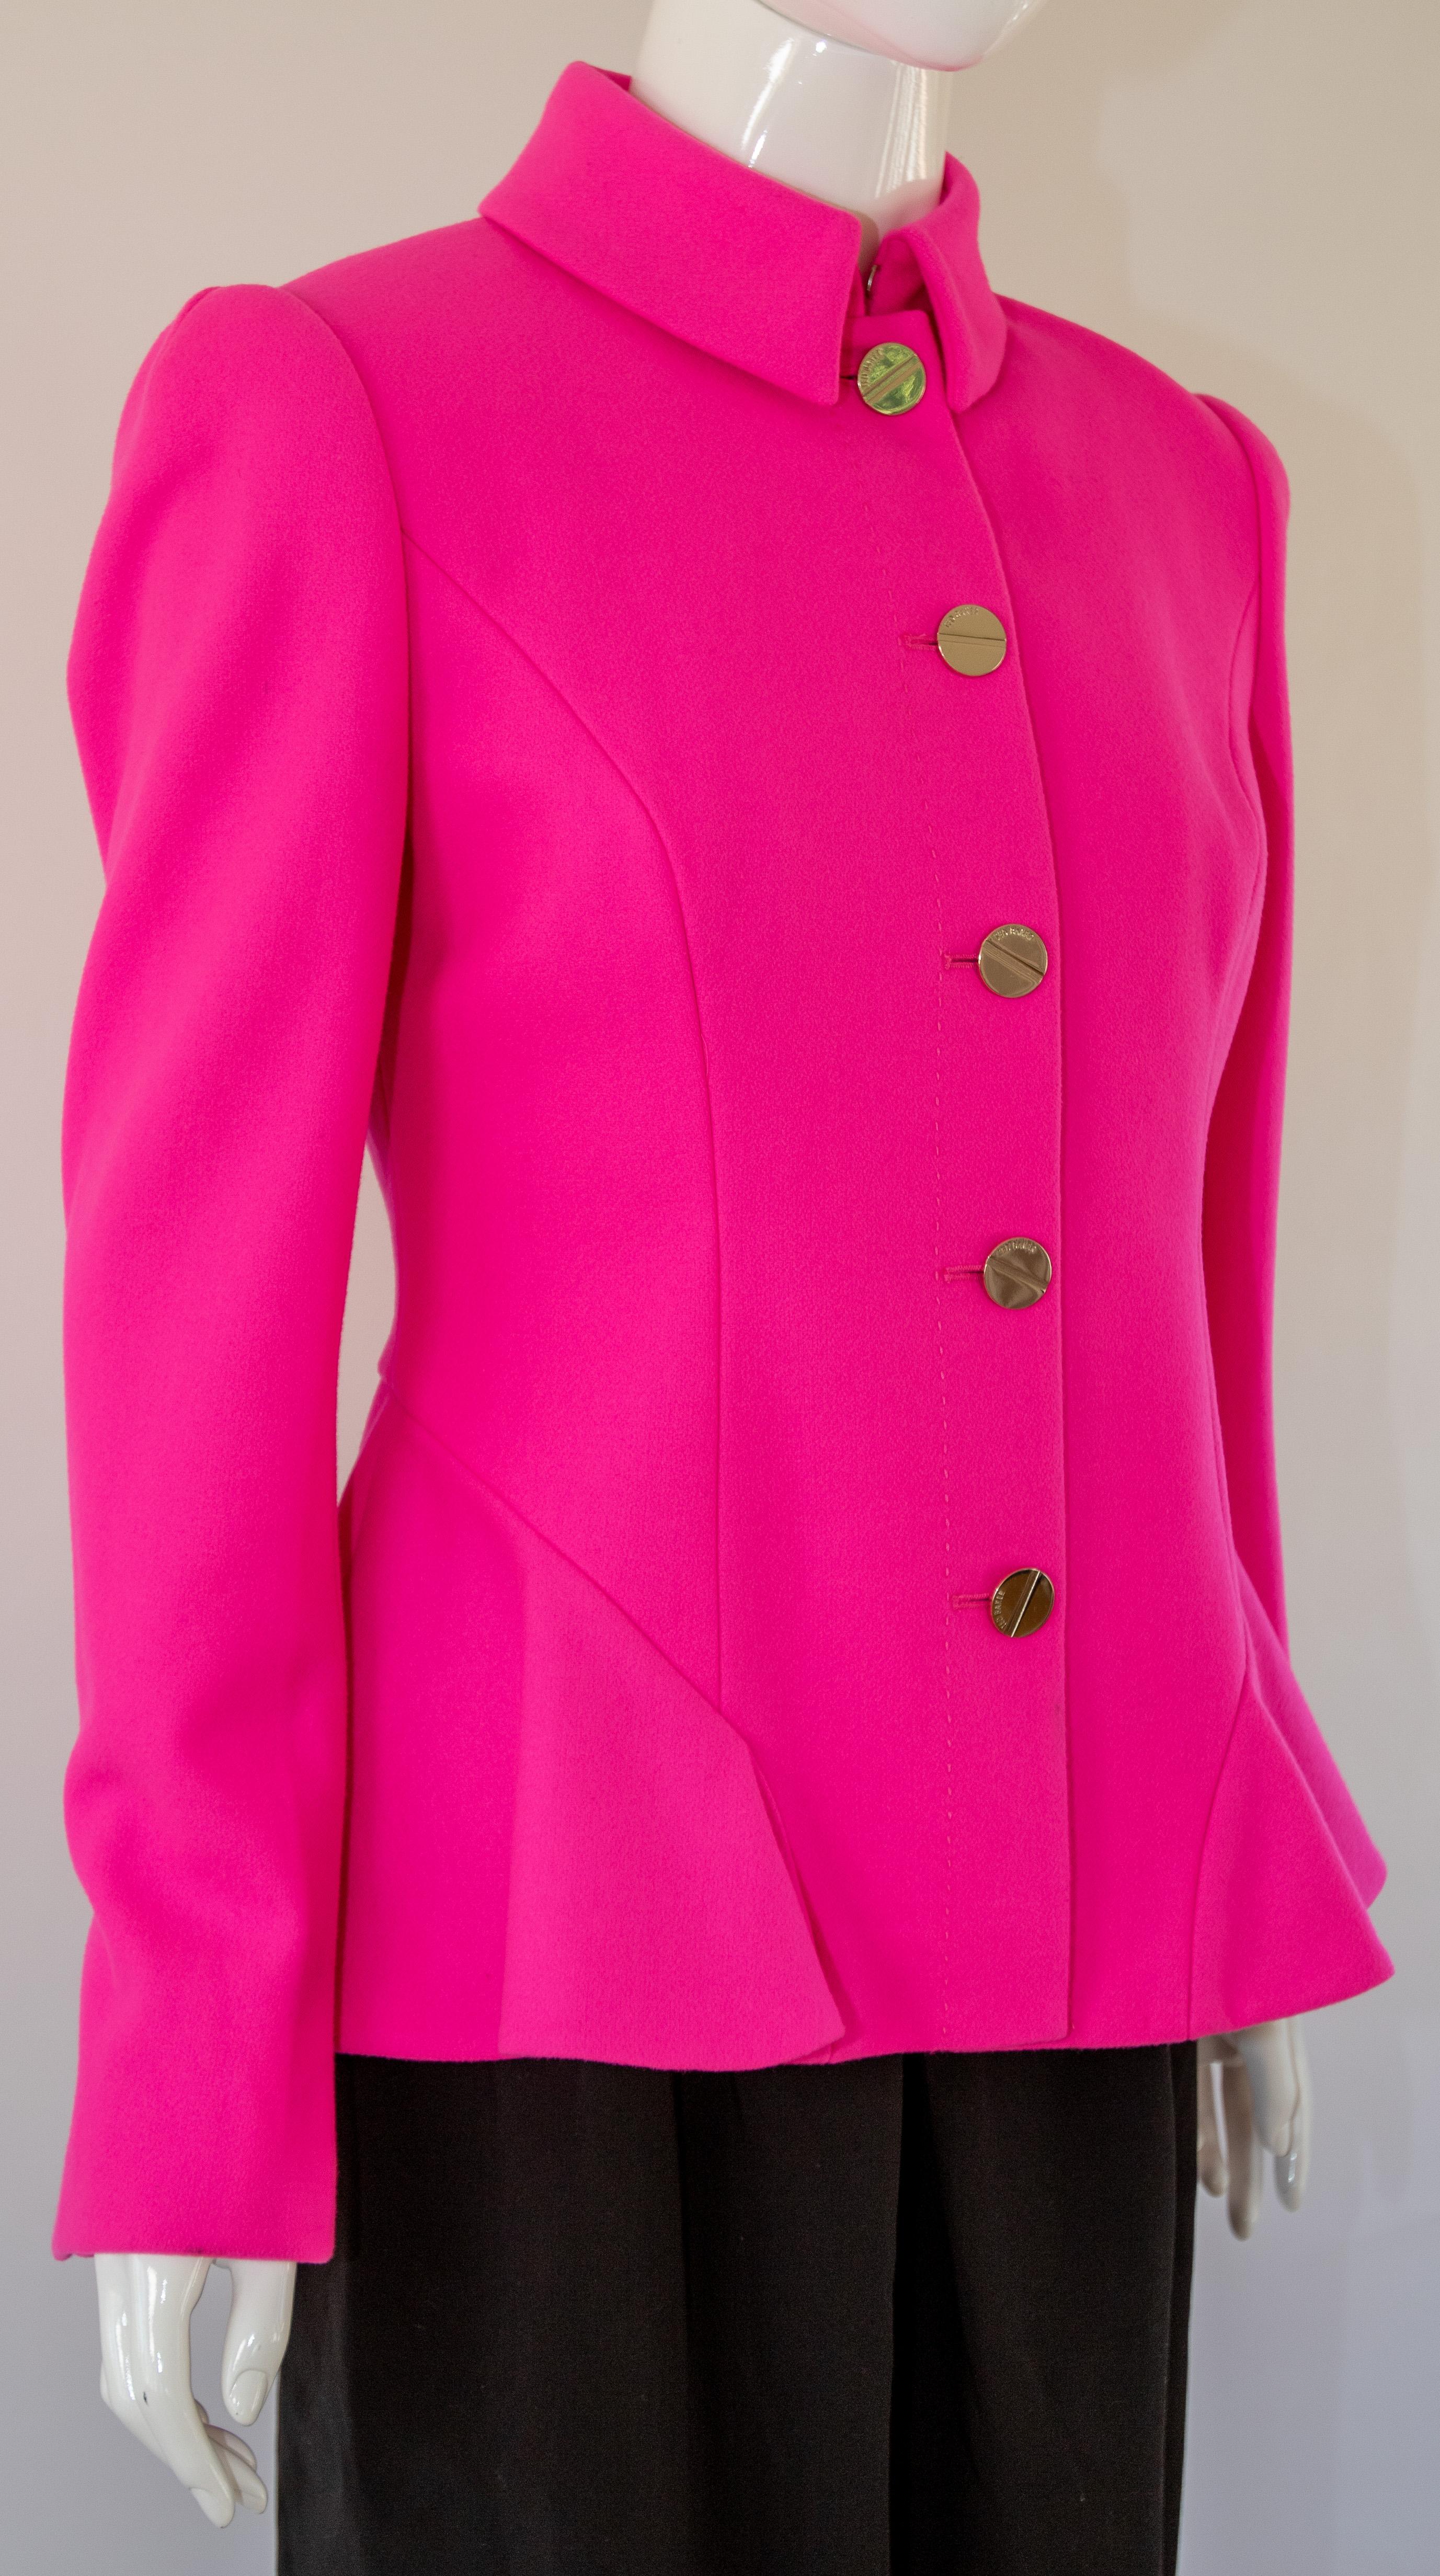 
Step out in a pop of color with this hot pink peplum jacket from Ted Baker.
A short wool-blend coat with peplum waist detail and a high neck collar. 
Featuring Ted Baker branded gold buttons and a floral printed lining for added comfort and